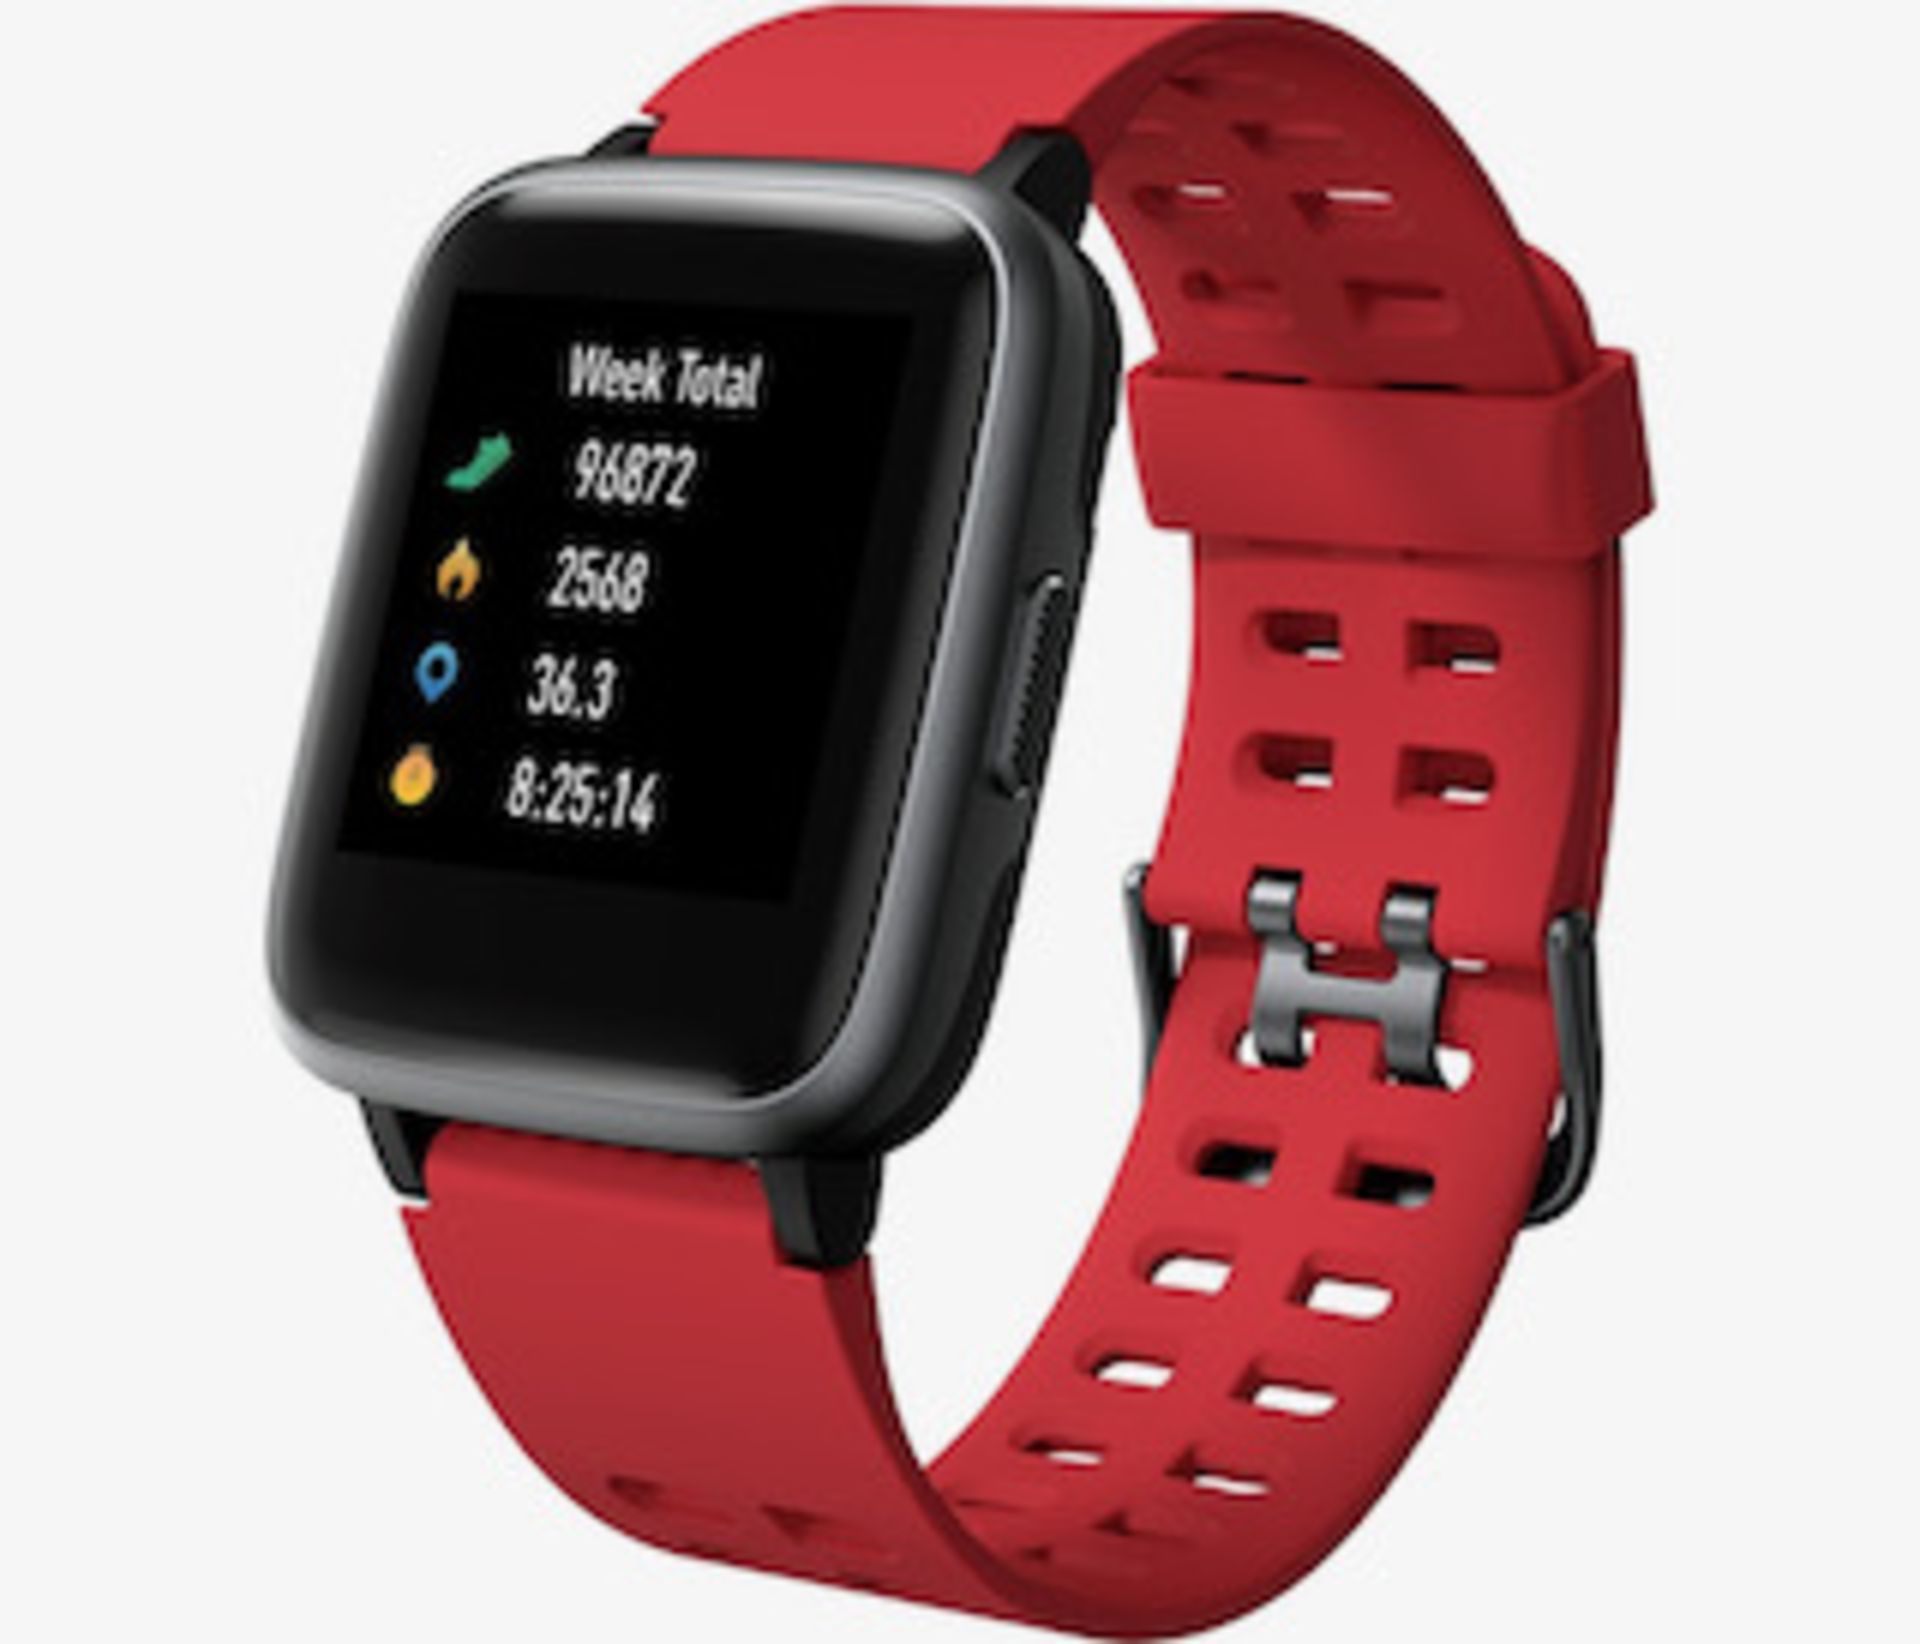 Brand New Unisex Fitness Tracker Watch Id205 Red Strap About This Item 1.3-Inch LCD Colour - Image 6 of 34